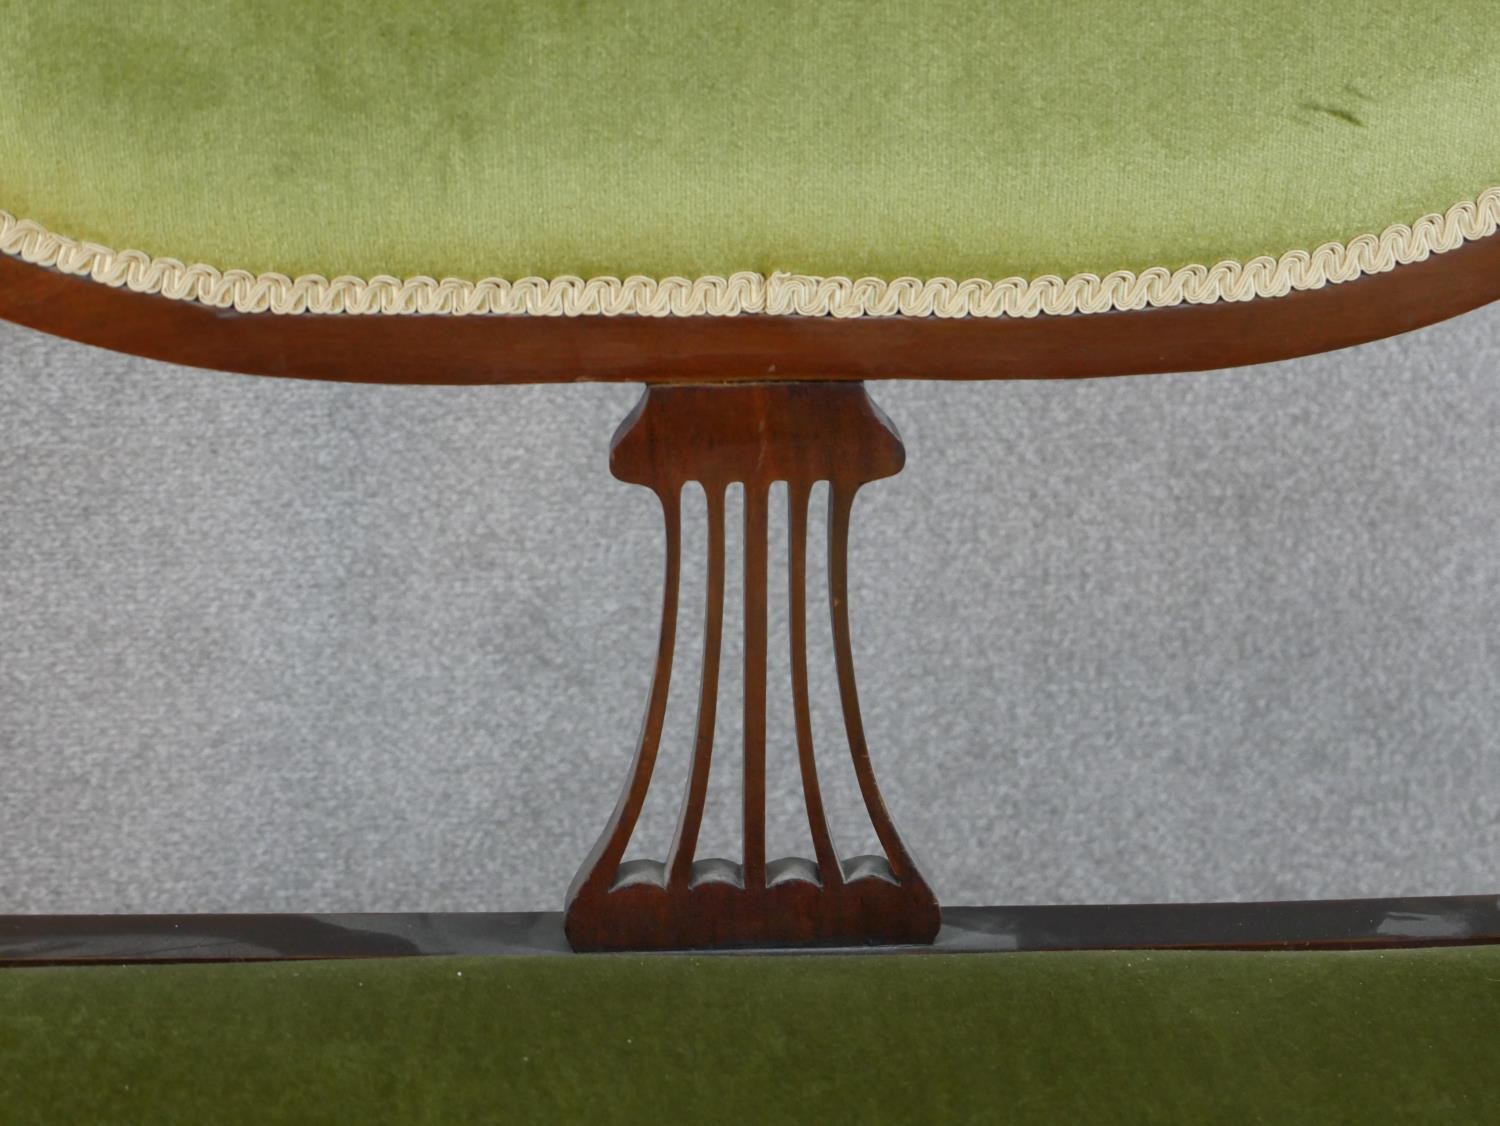 An Edwardian mahogany framed open arm settee with pierced splat back, with green upholstered seat - Image 4 of 7